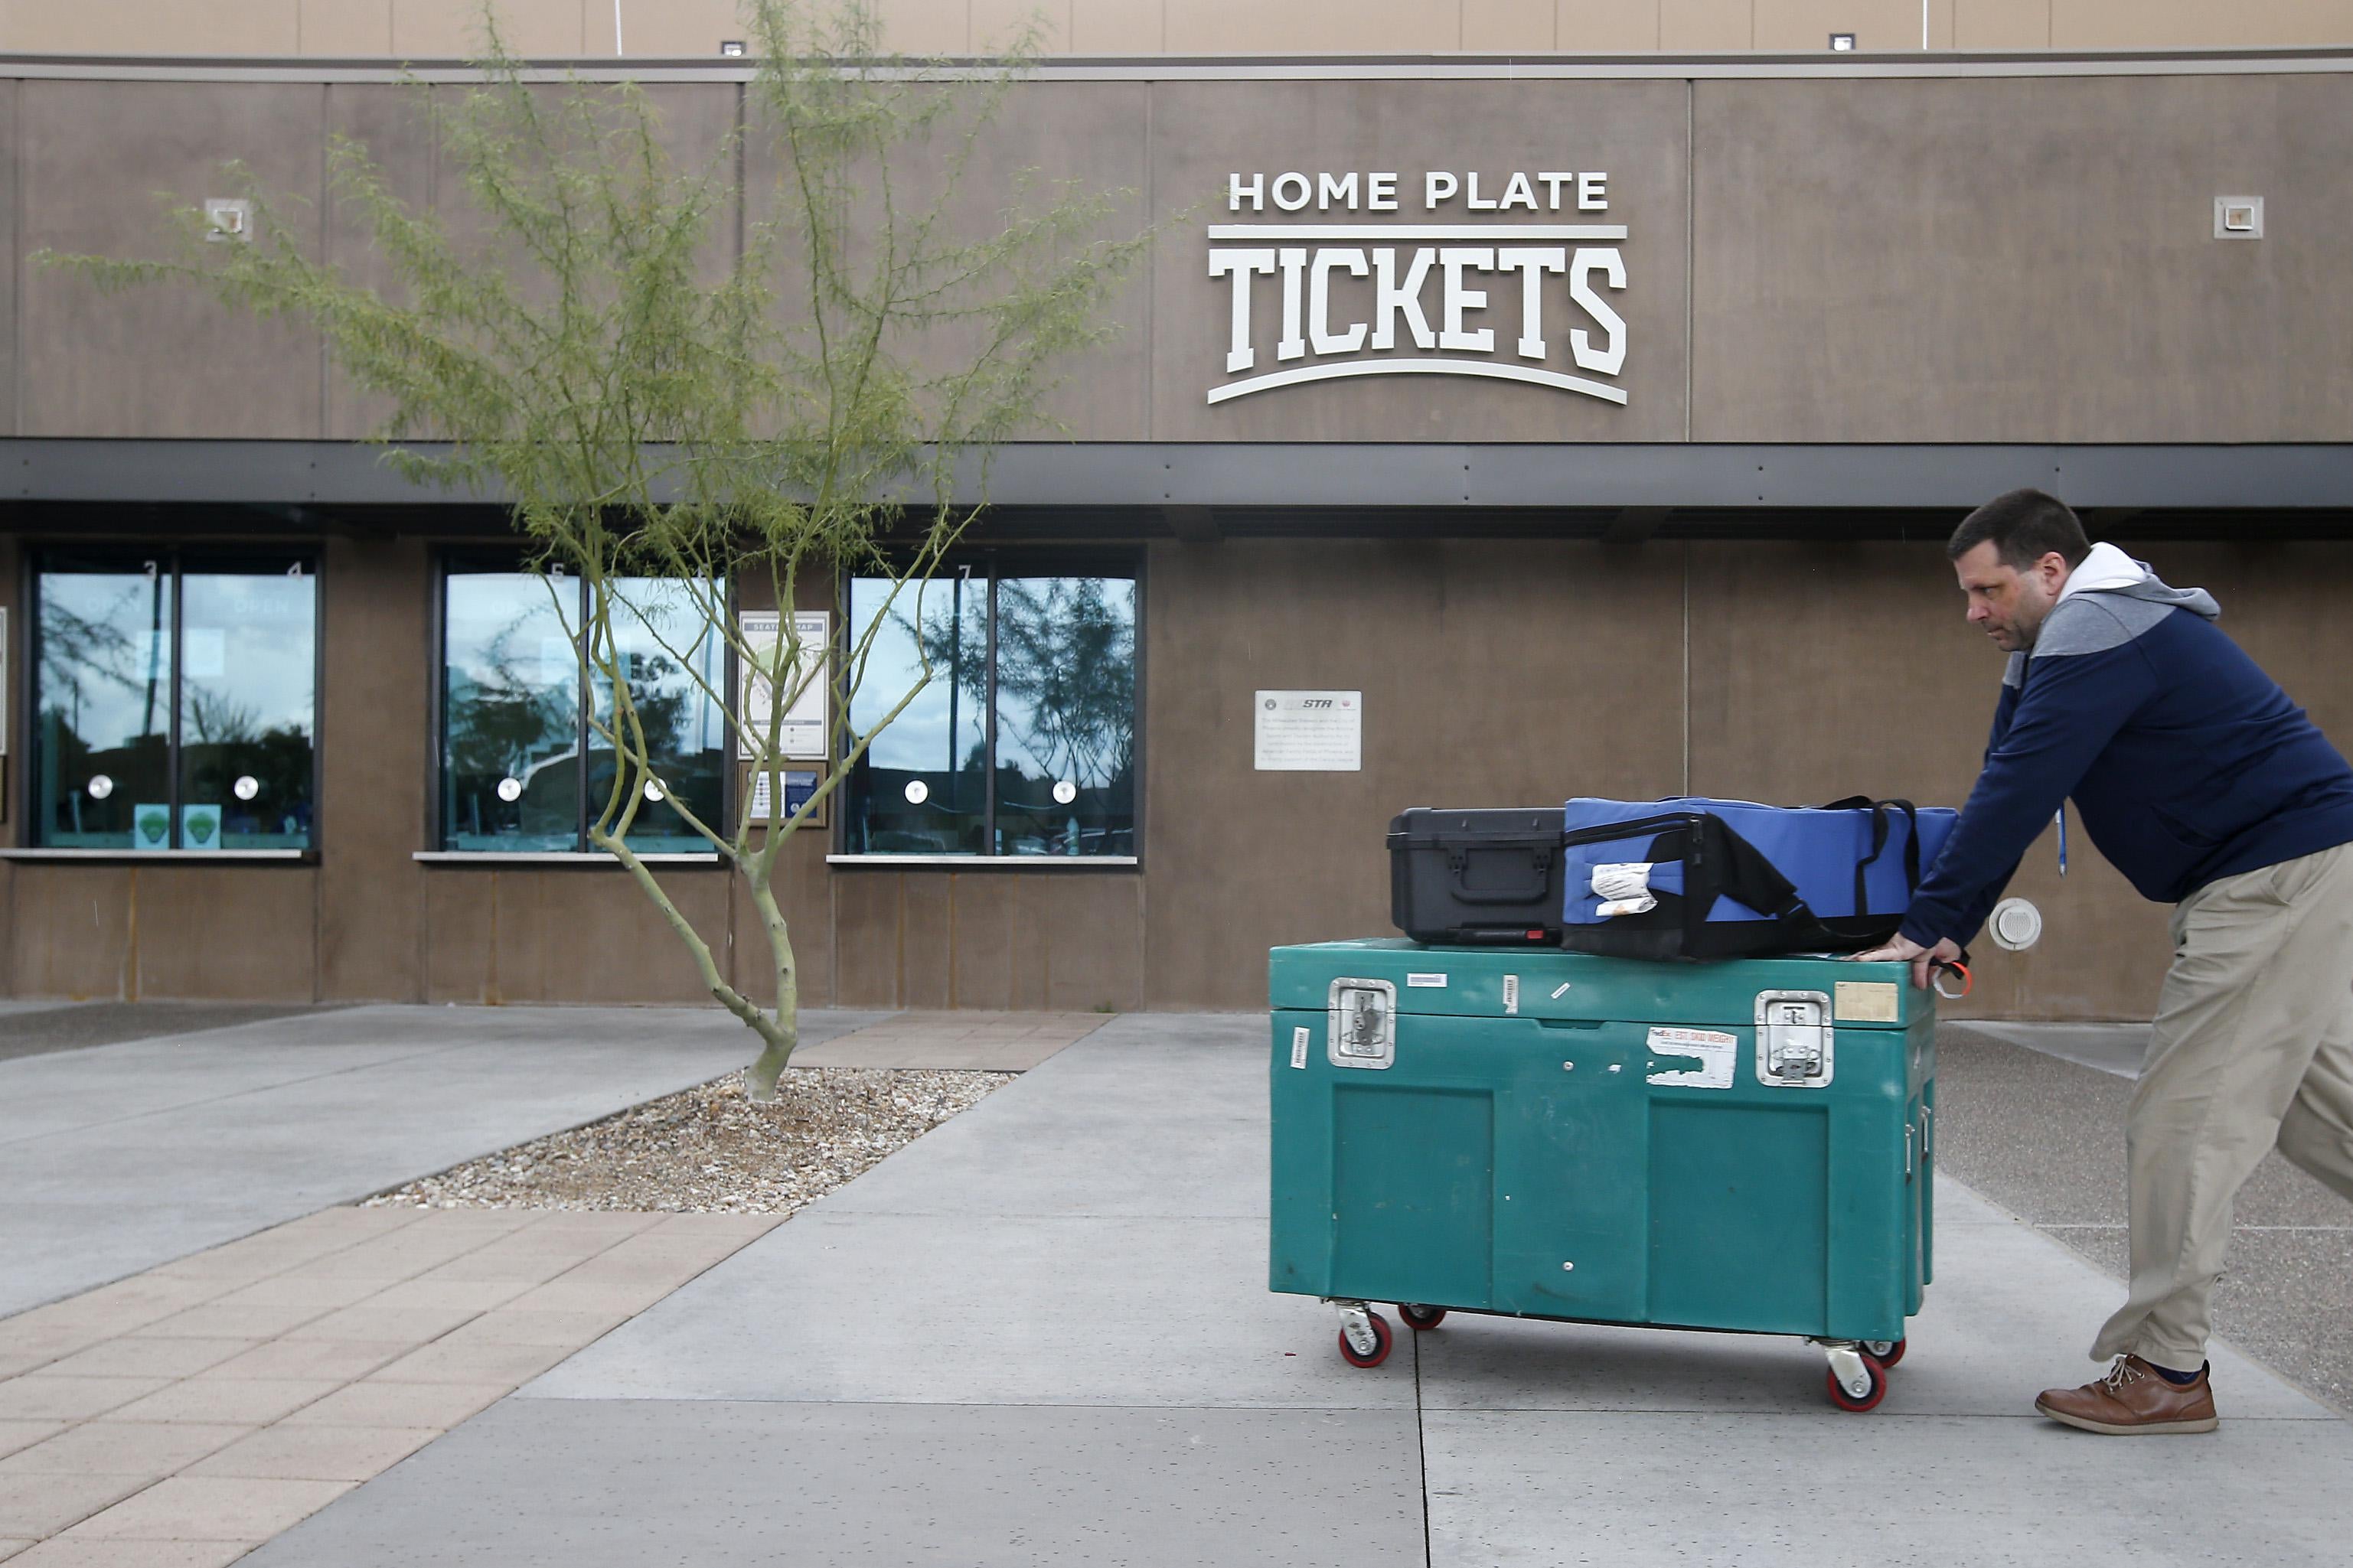 Stadium personnel move equipment past the ticket windows at American Family Fields stadium, spring training home of the Milwaukee Brewers, following Major League Baseball’s decision to suspend all spring training games on March 12, 2020 in Phoenix, Arizona.